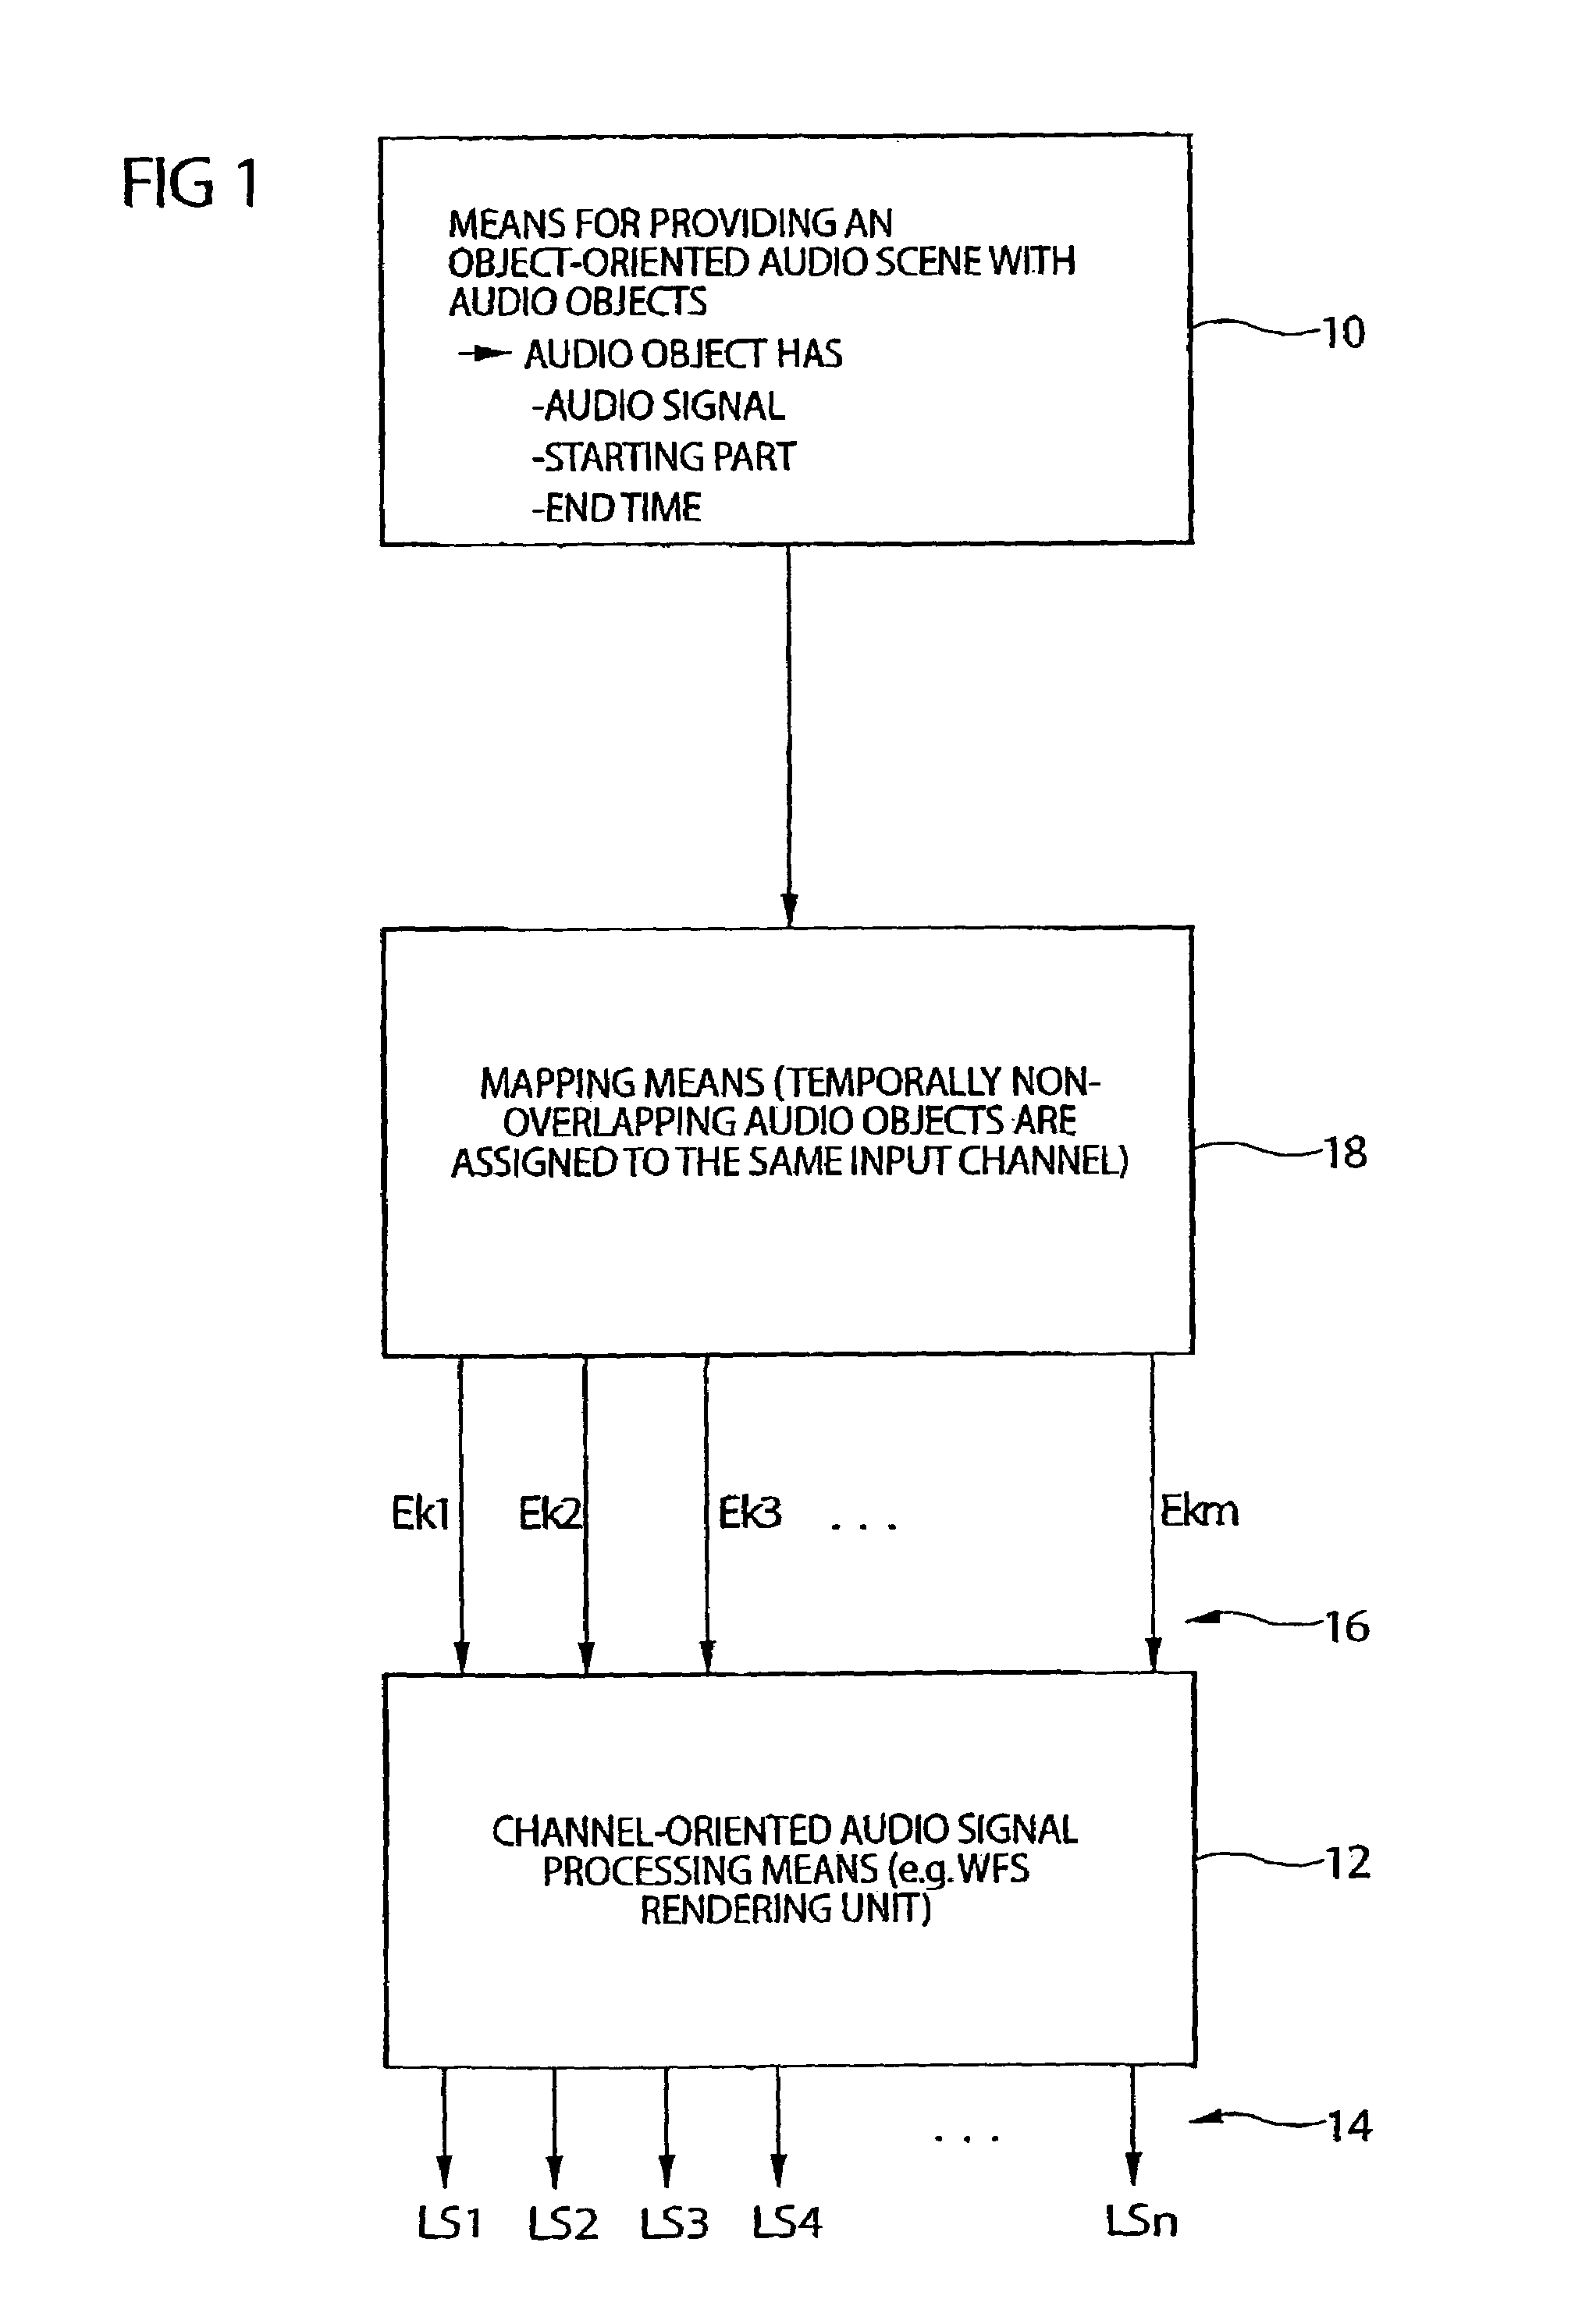 Apparatus and method for generating, storing, or editing an audio representation of an audio scene